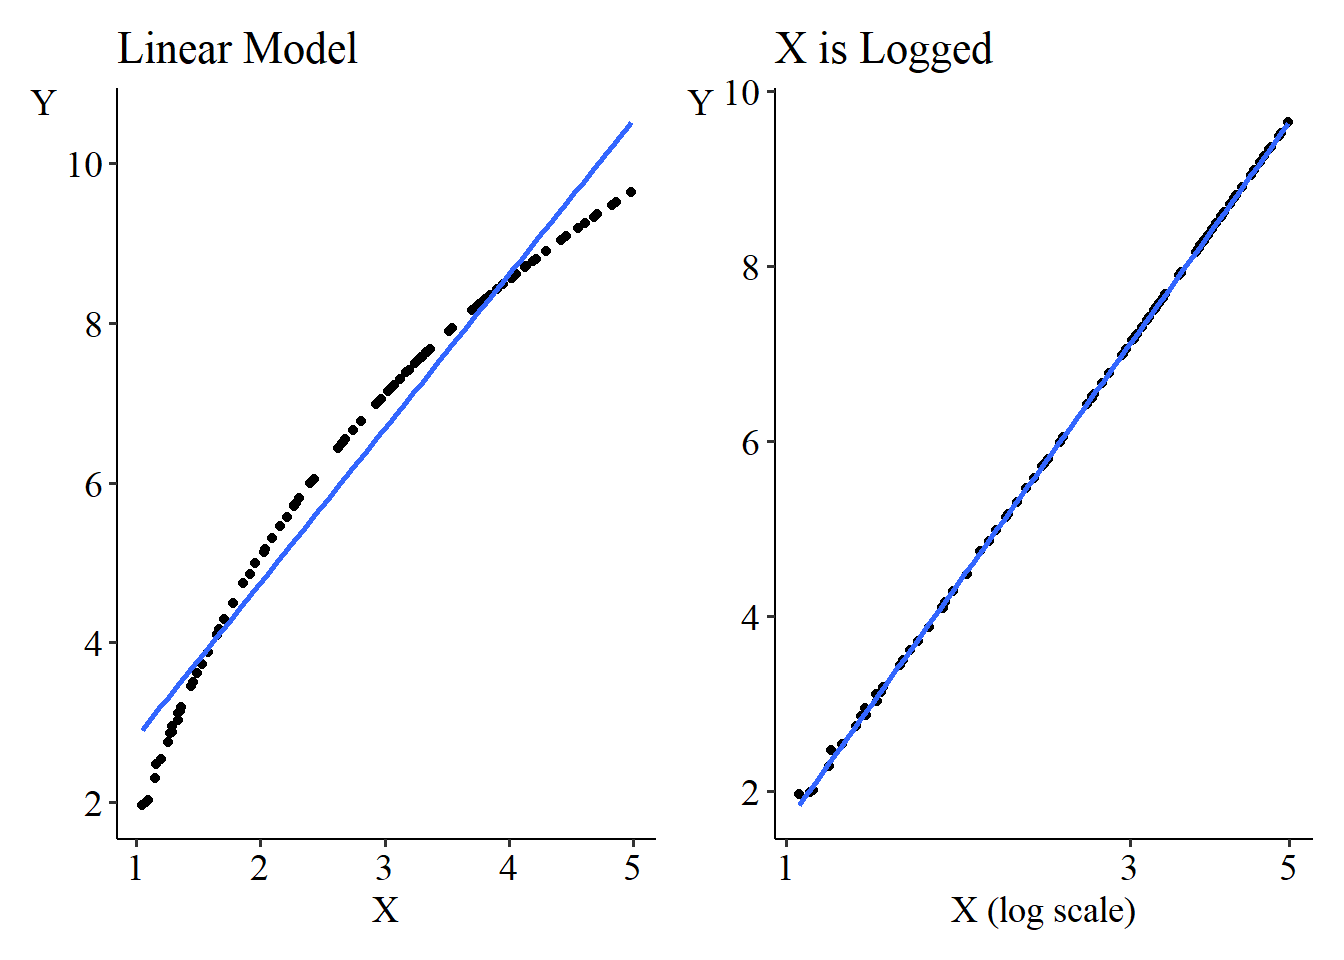 Two scatterplots, one of X vs Y where the data is curved but the best-fit line is straight and fits poorly, and another of log(X) vs Y, where both the data and line are straight and look good.